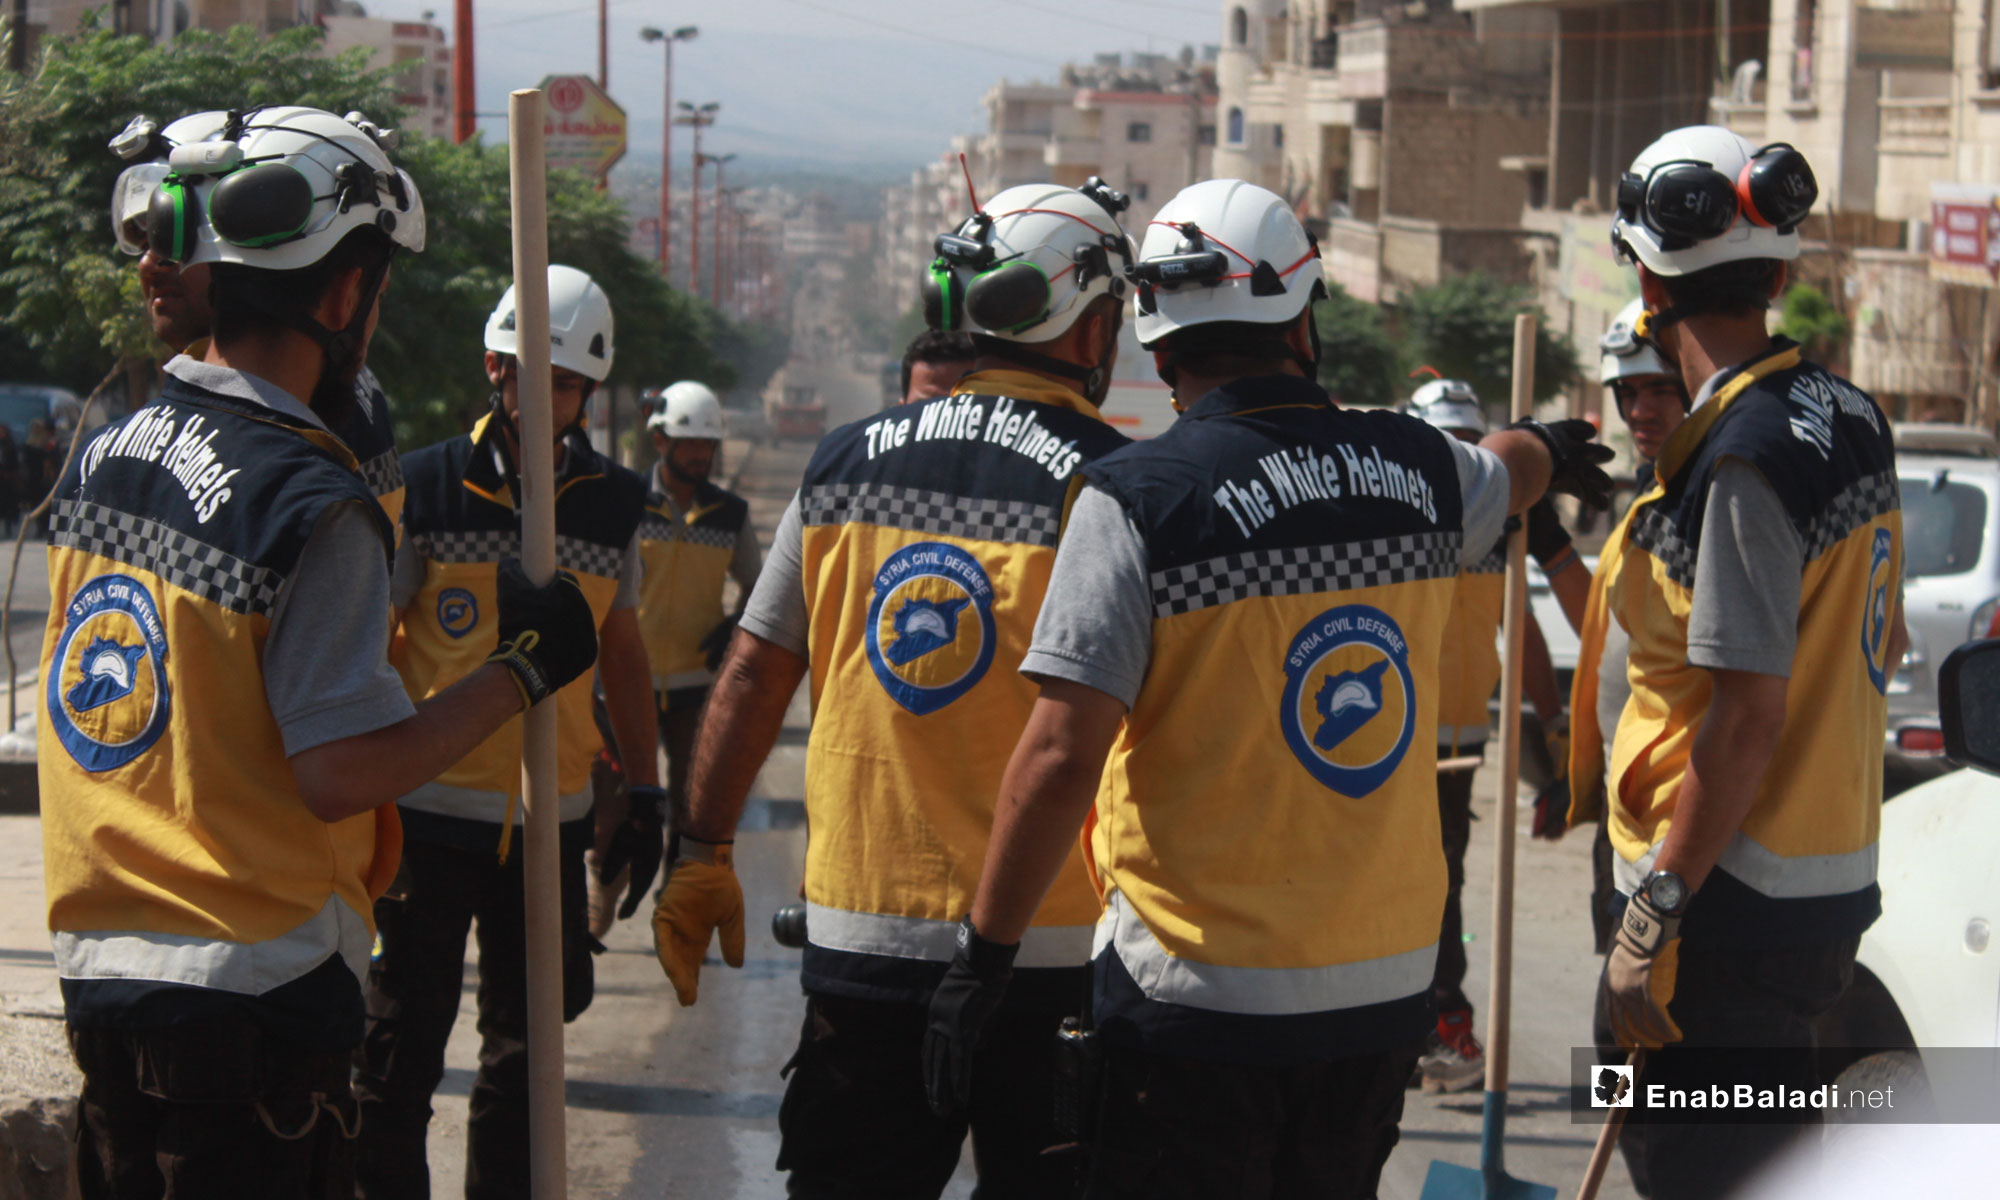   Civil Defense members in a campaign for the rehabilitation of roads in Afrin city – August 1, 2018 (Enab Baladi)